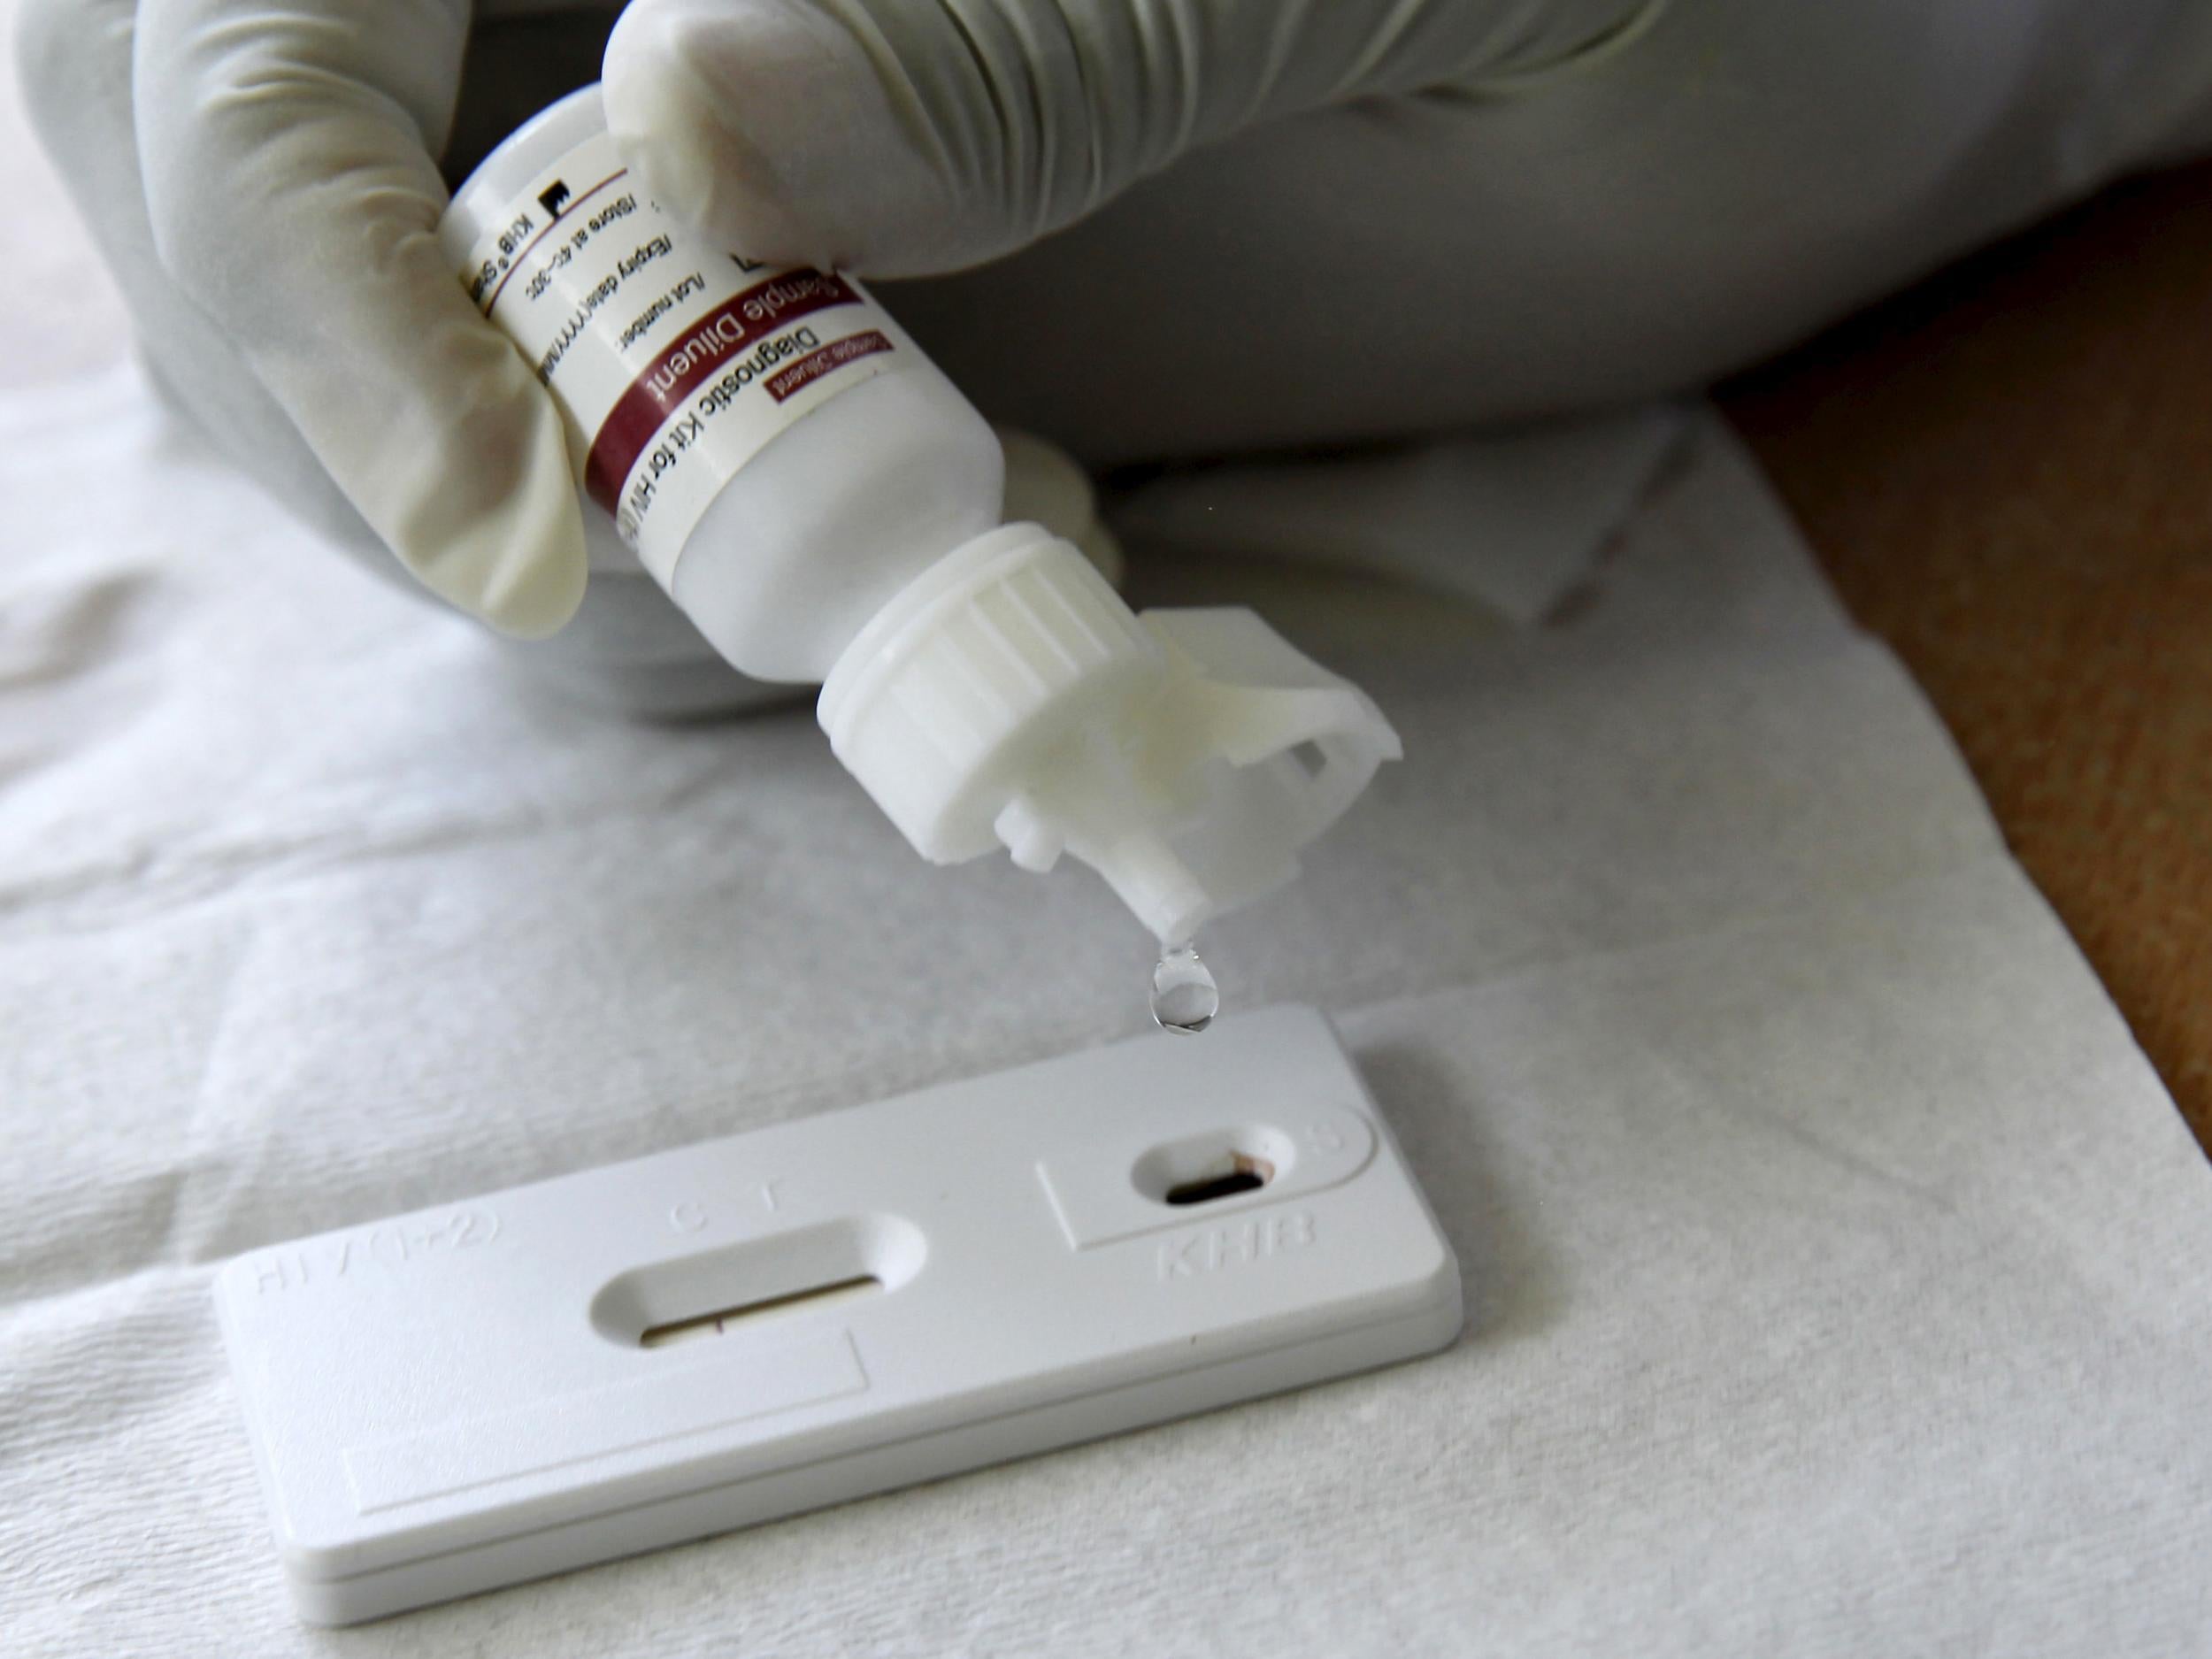 File photo: A reactor is added to a blood sample to test for HIV